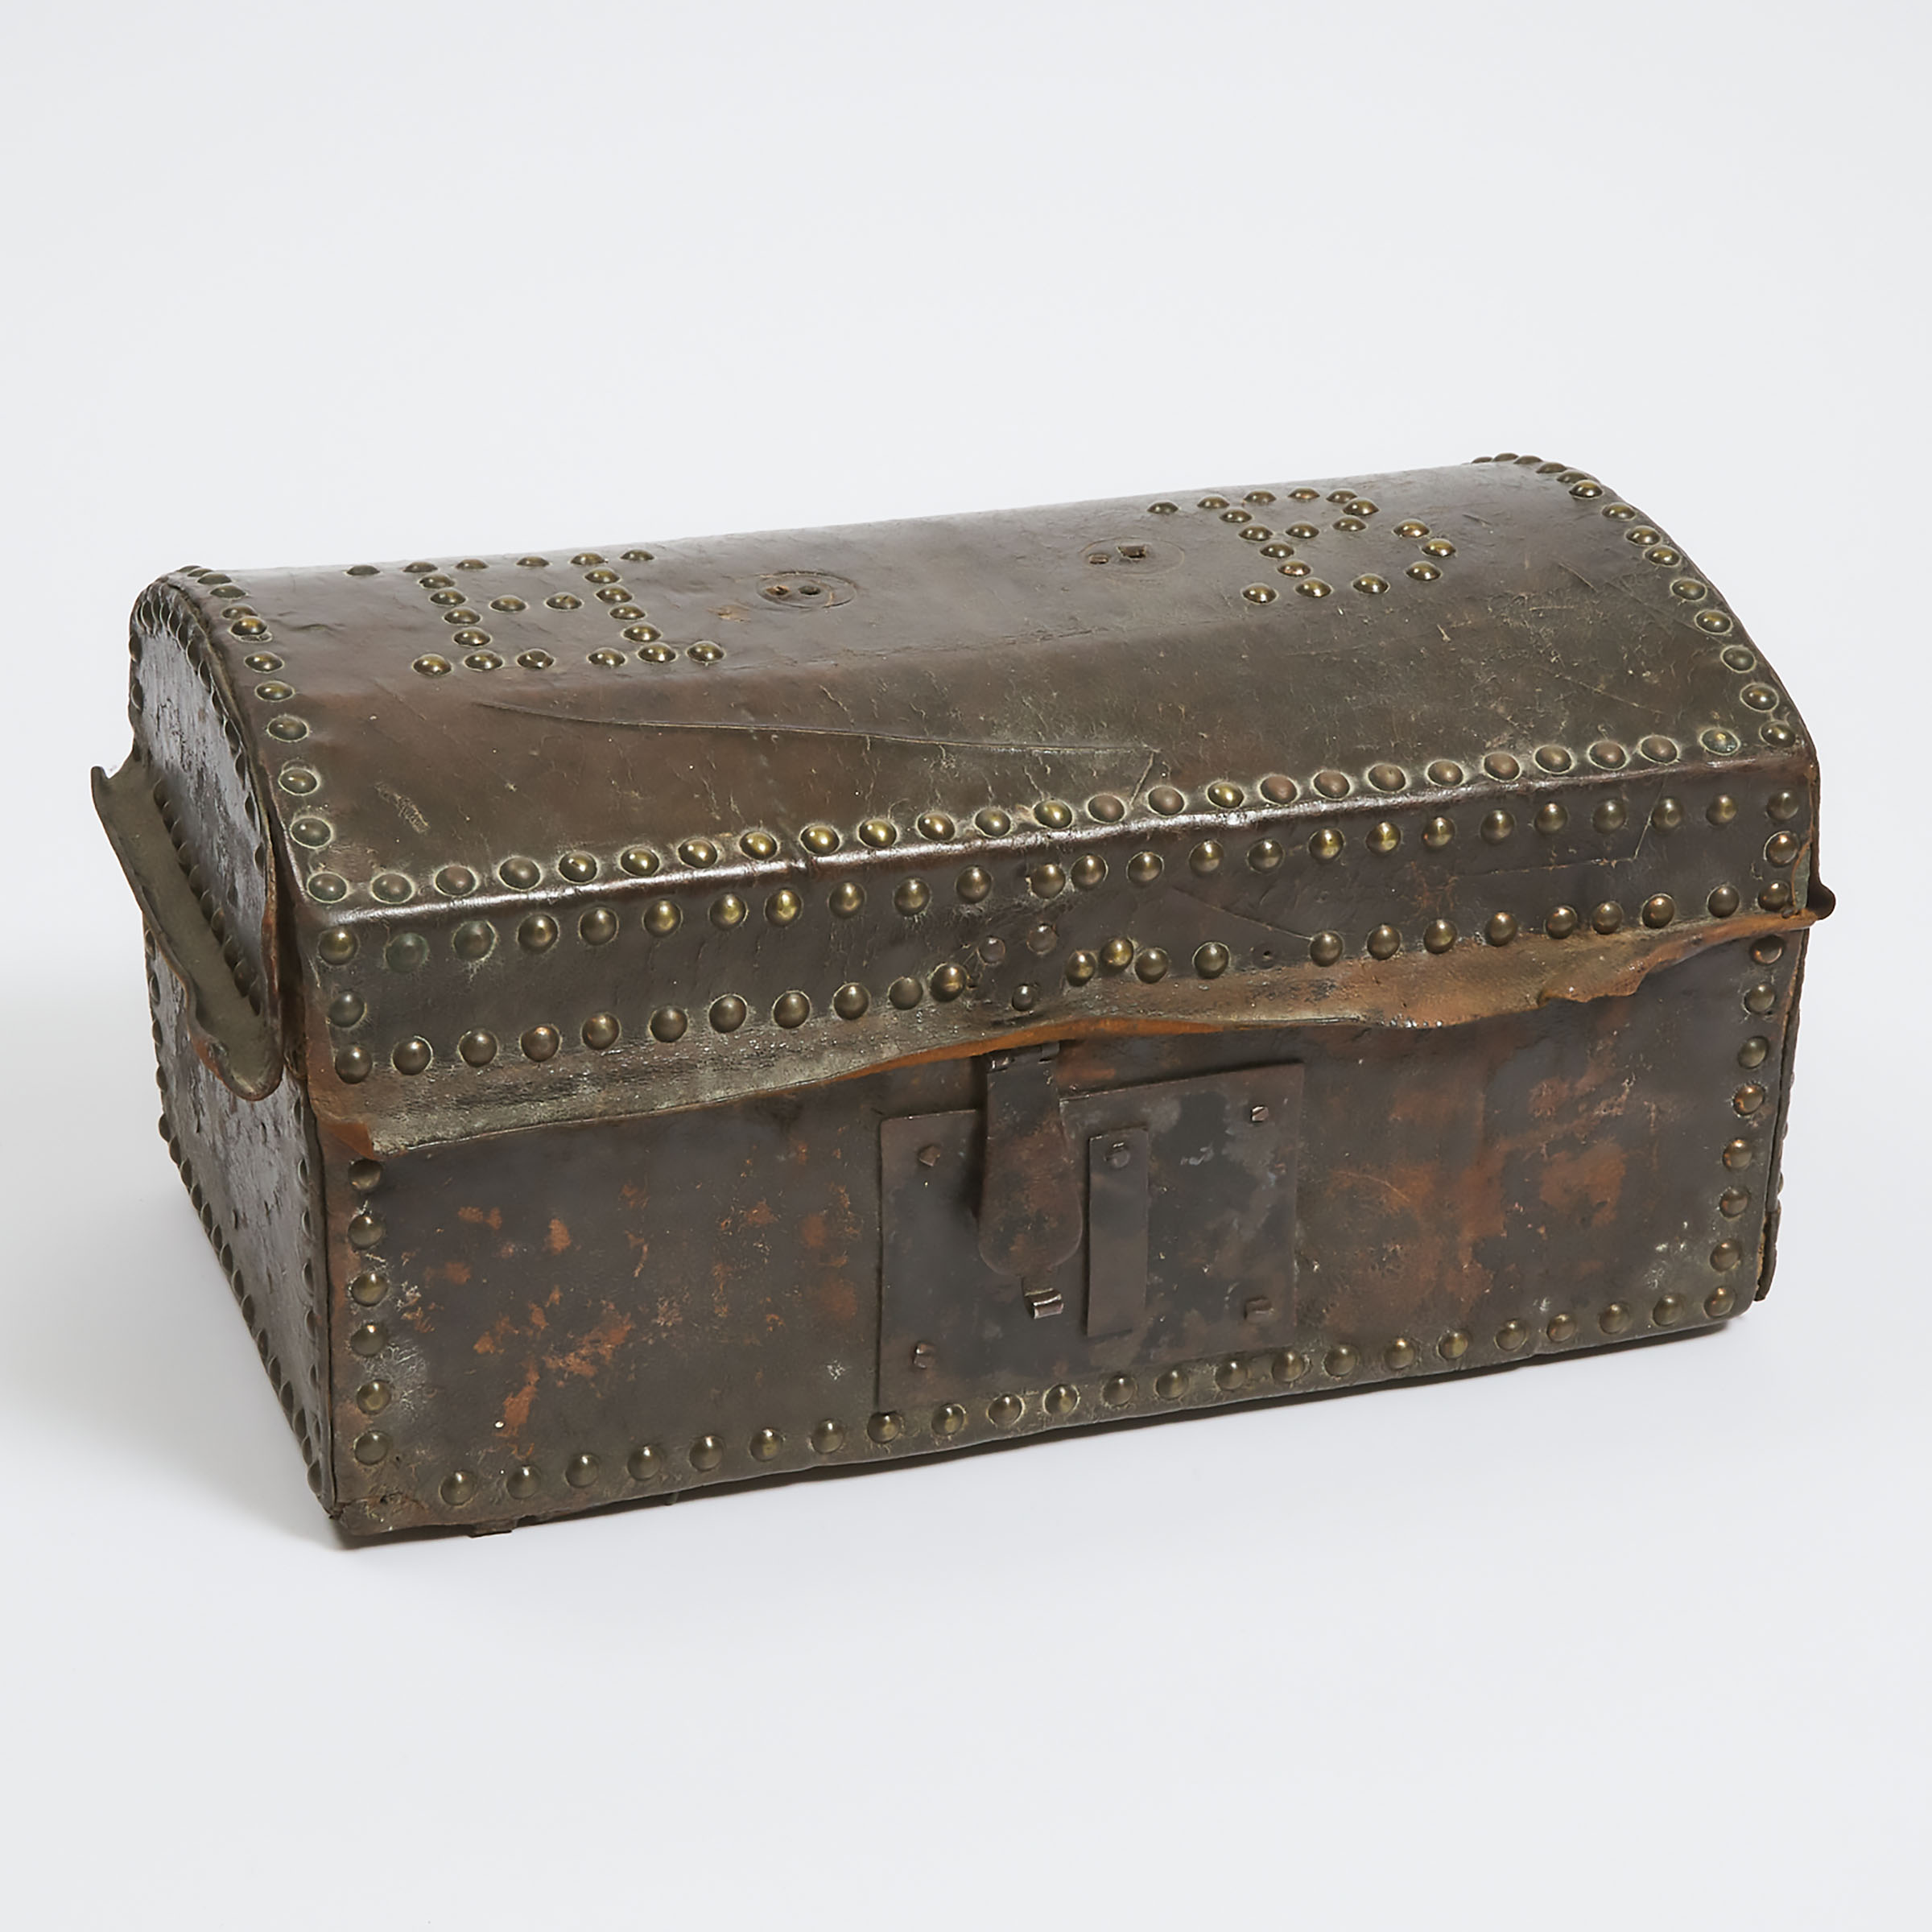 Englsh Dome Lidded Studded Leather Dispatch Box, 17th/early 18th century